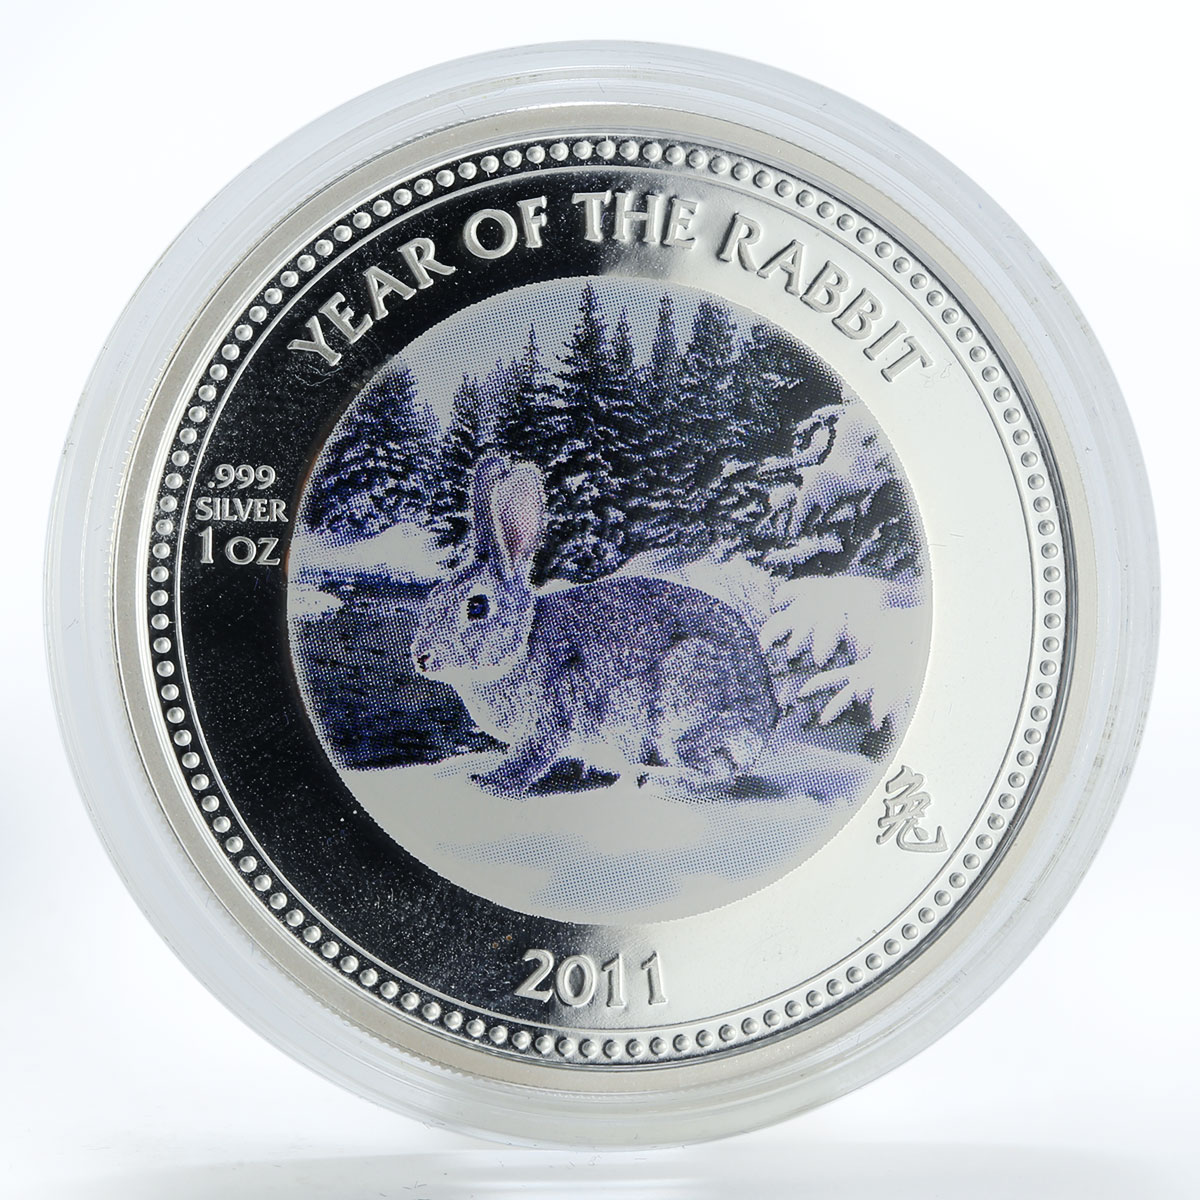 Pitcairn Islands 2 dollars Year of the Rabbit colored silver coin 2011